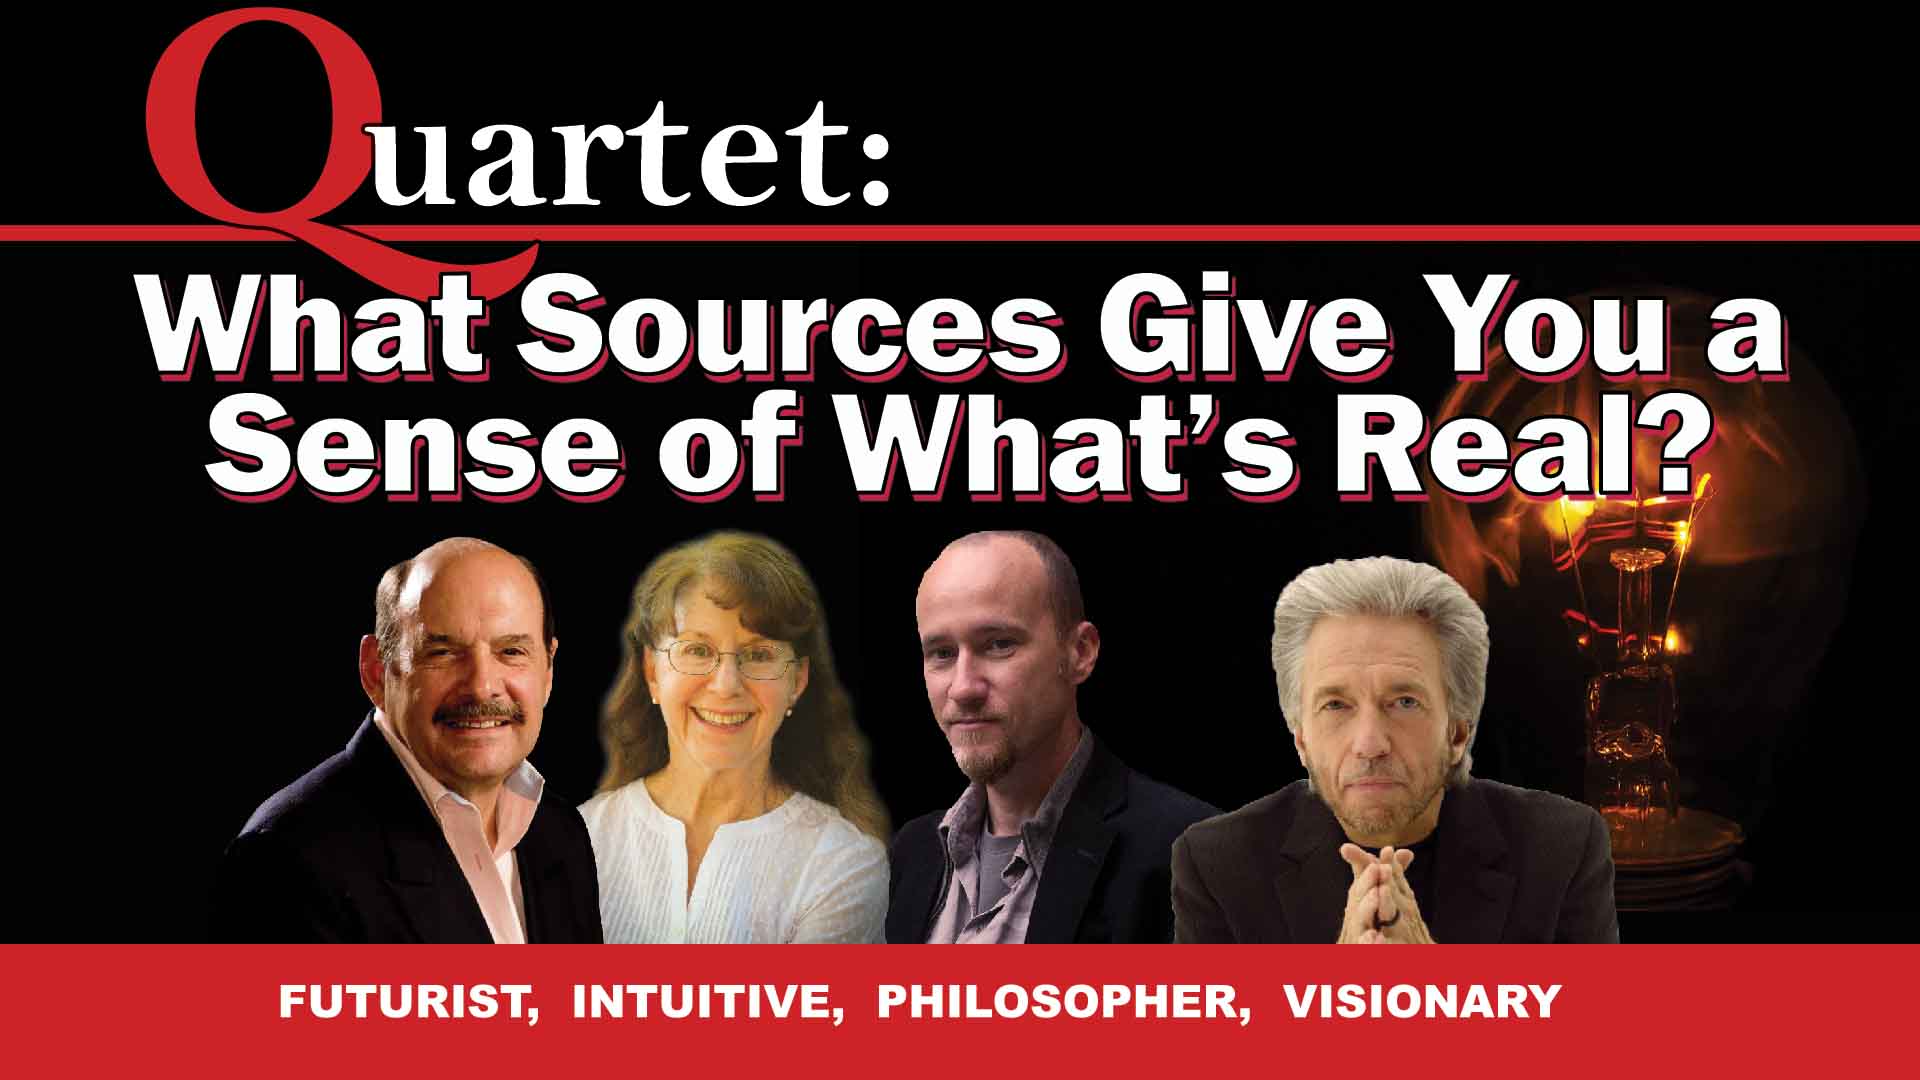 Quartet Premium - What Sources Give You a Sense of What’s Real